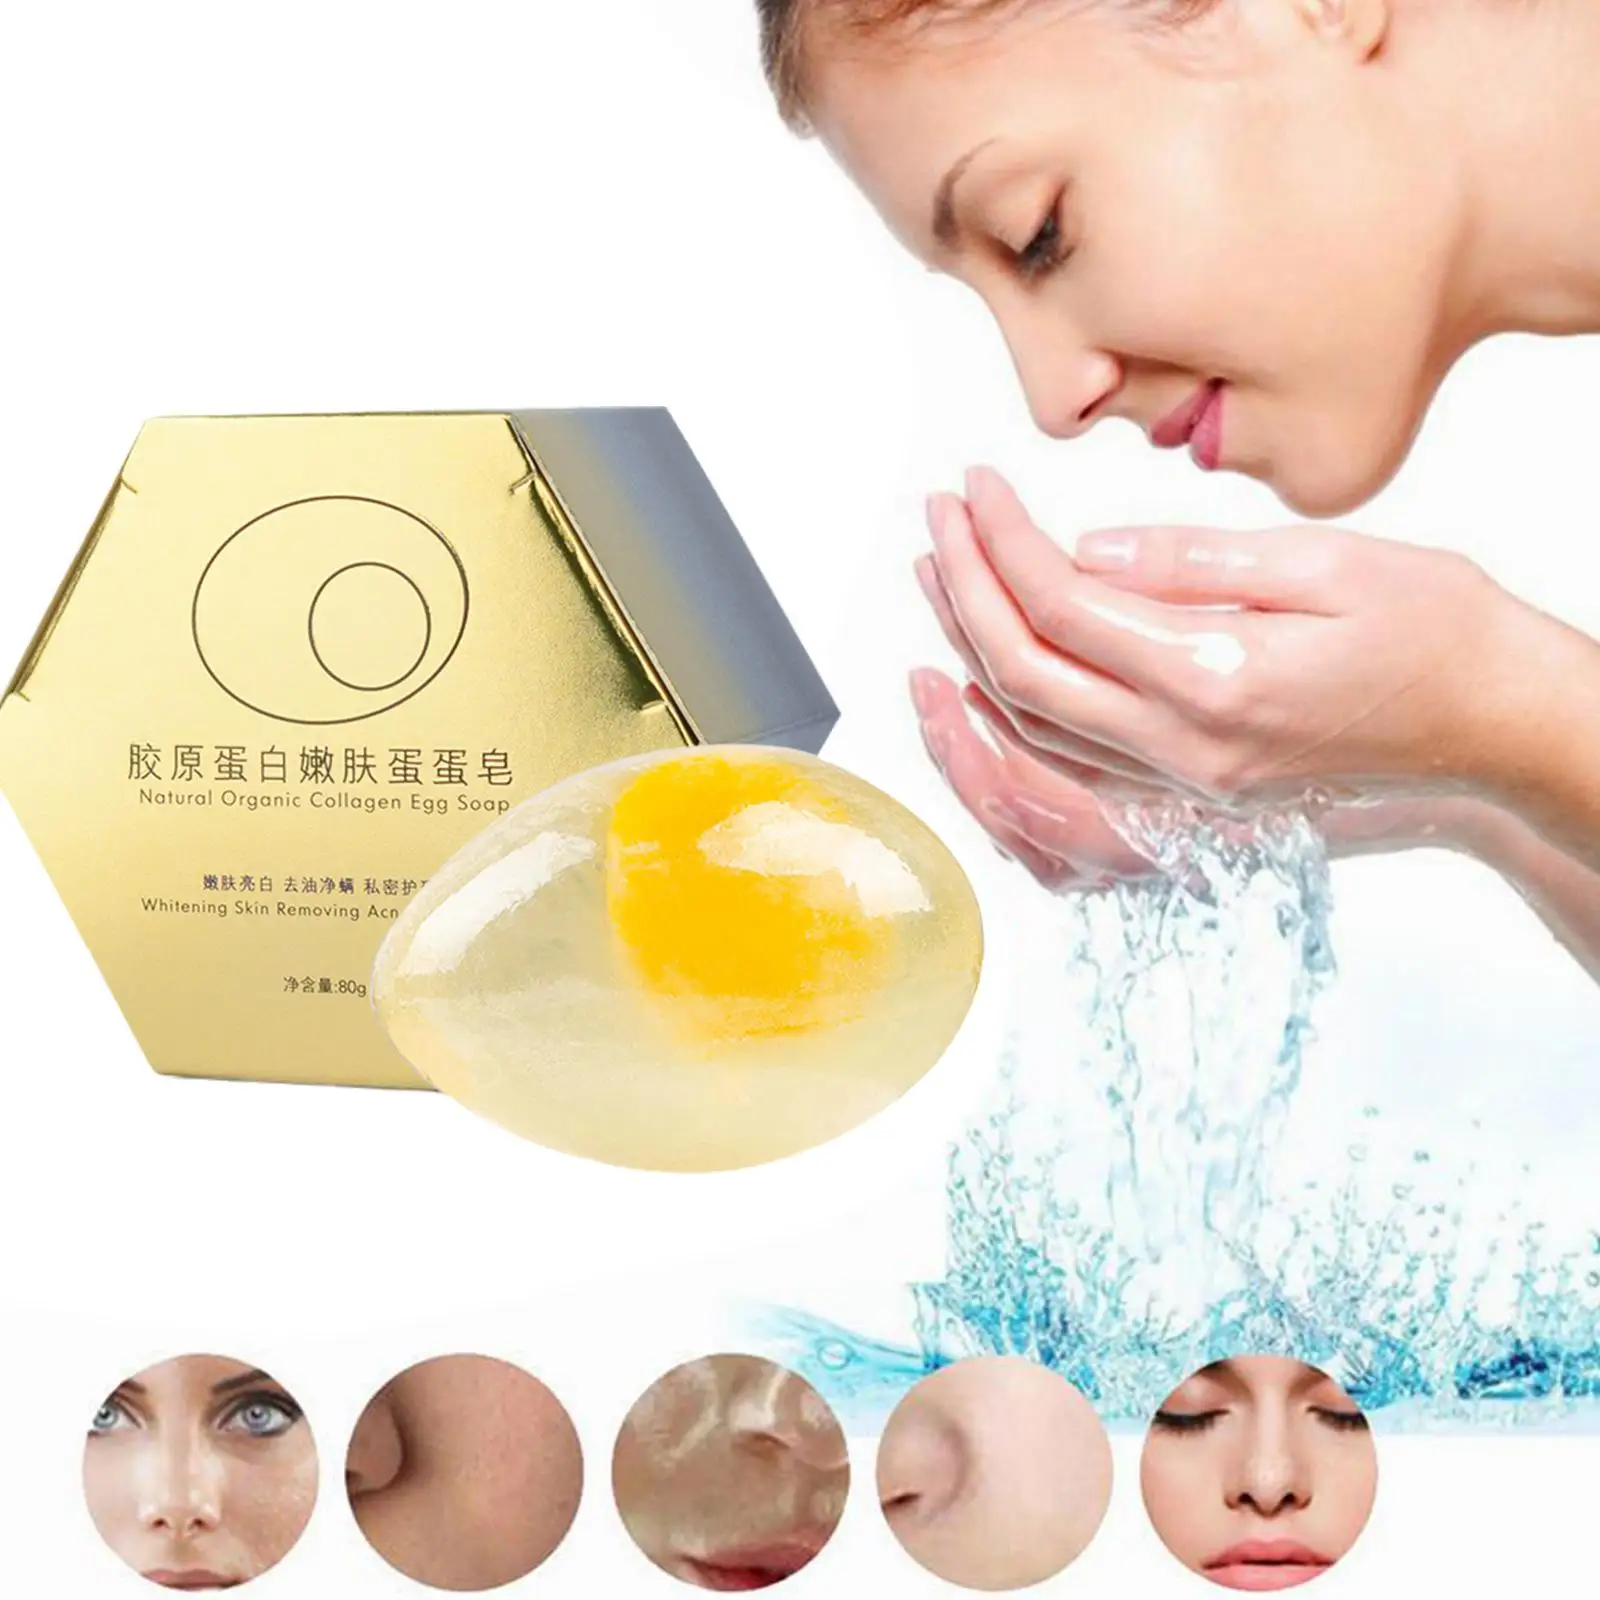 

80g Handmade Collagen Soap Natural Organic Egg Soap Pimple Face Removal Cleansing A Facial Soap Whitening Cleaner Soap G7K0 S8J6